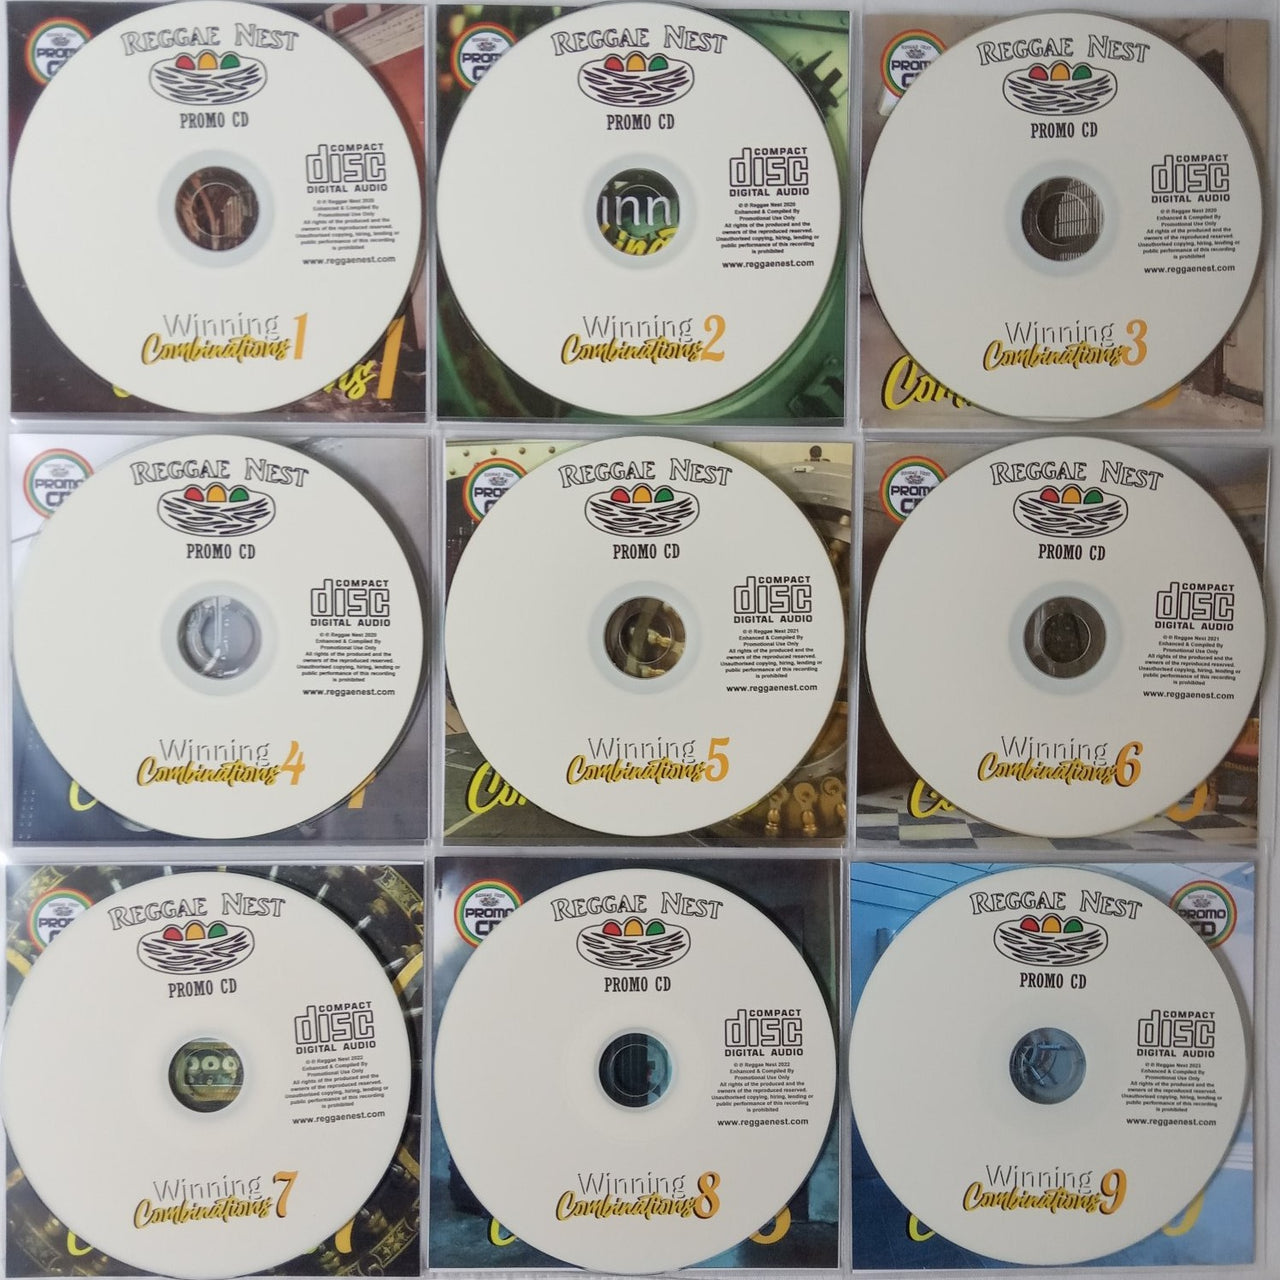 Winning Combinations 9CD MEGA Pack - Featuring Reggae & Dancehall Artists in Combo